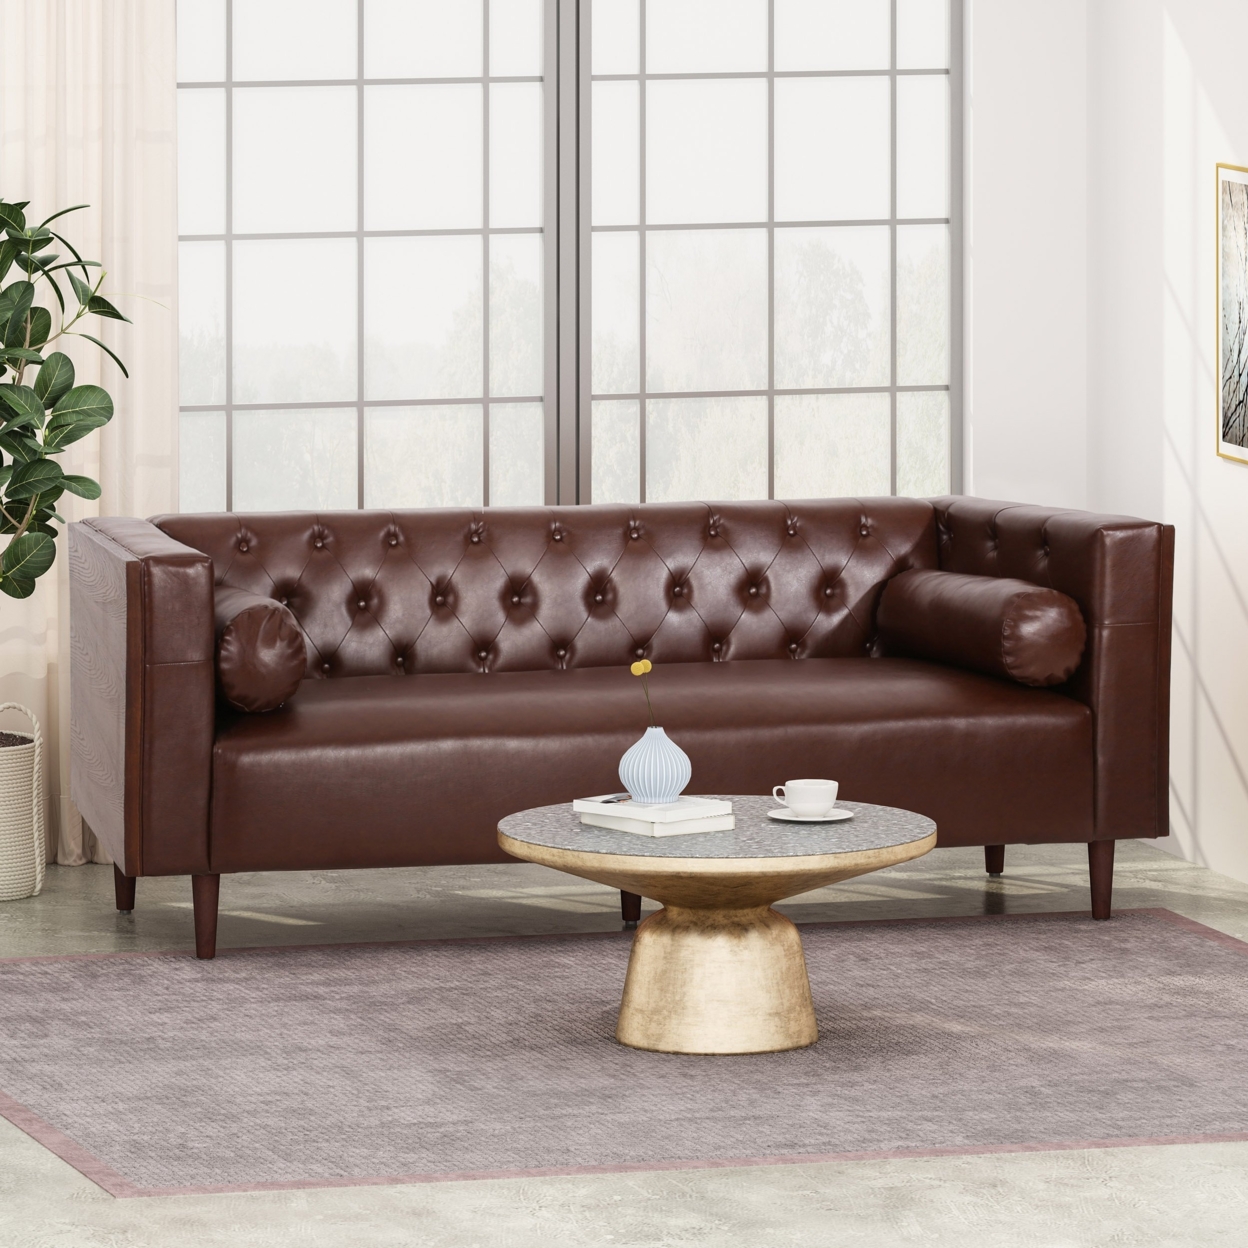 Neilan Contemporary Tufted Deep Seated Sofa With Accent Pillows - Dark Brown